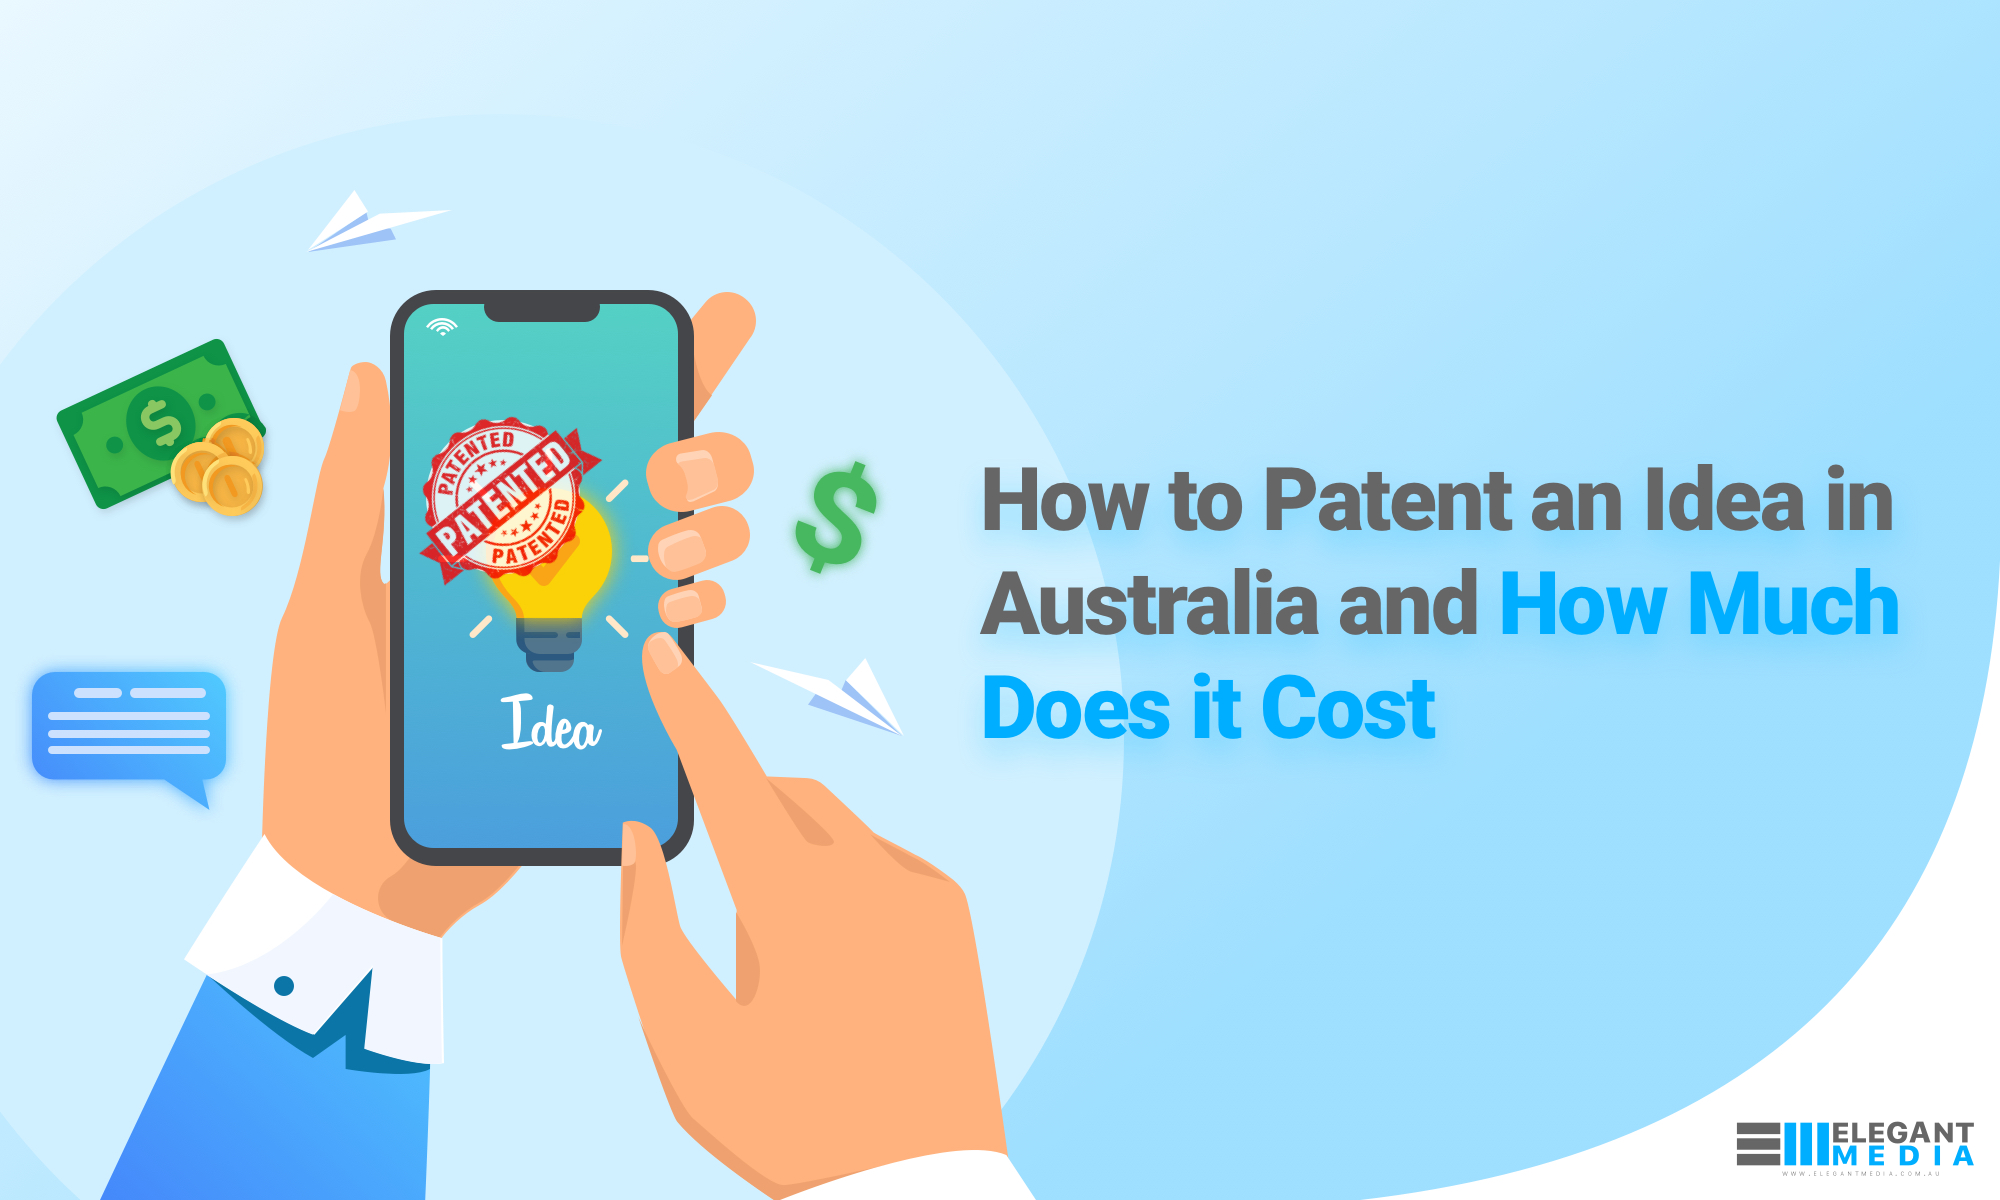 How to patent an idea in Australia